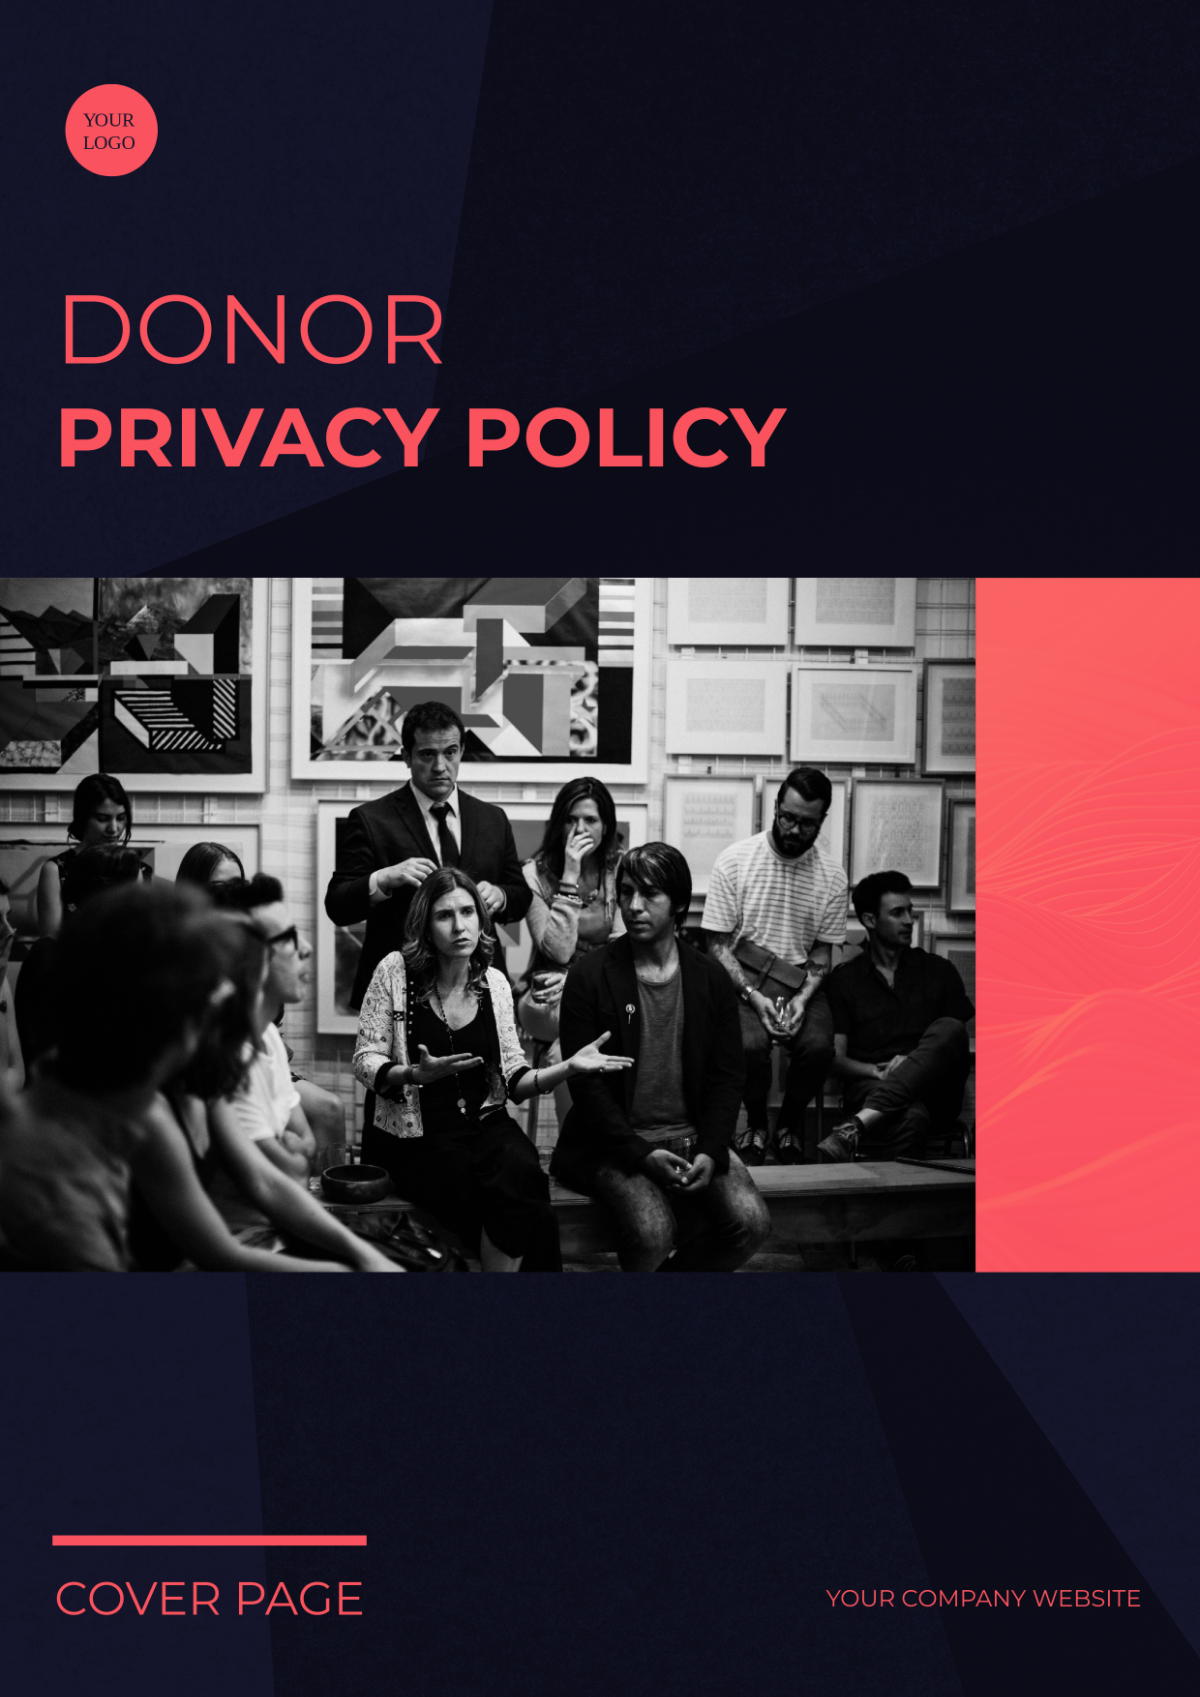 Donor Privacy Policy Sample Cover Page